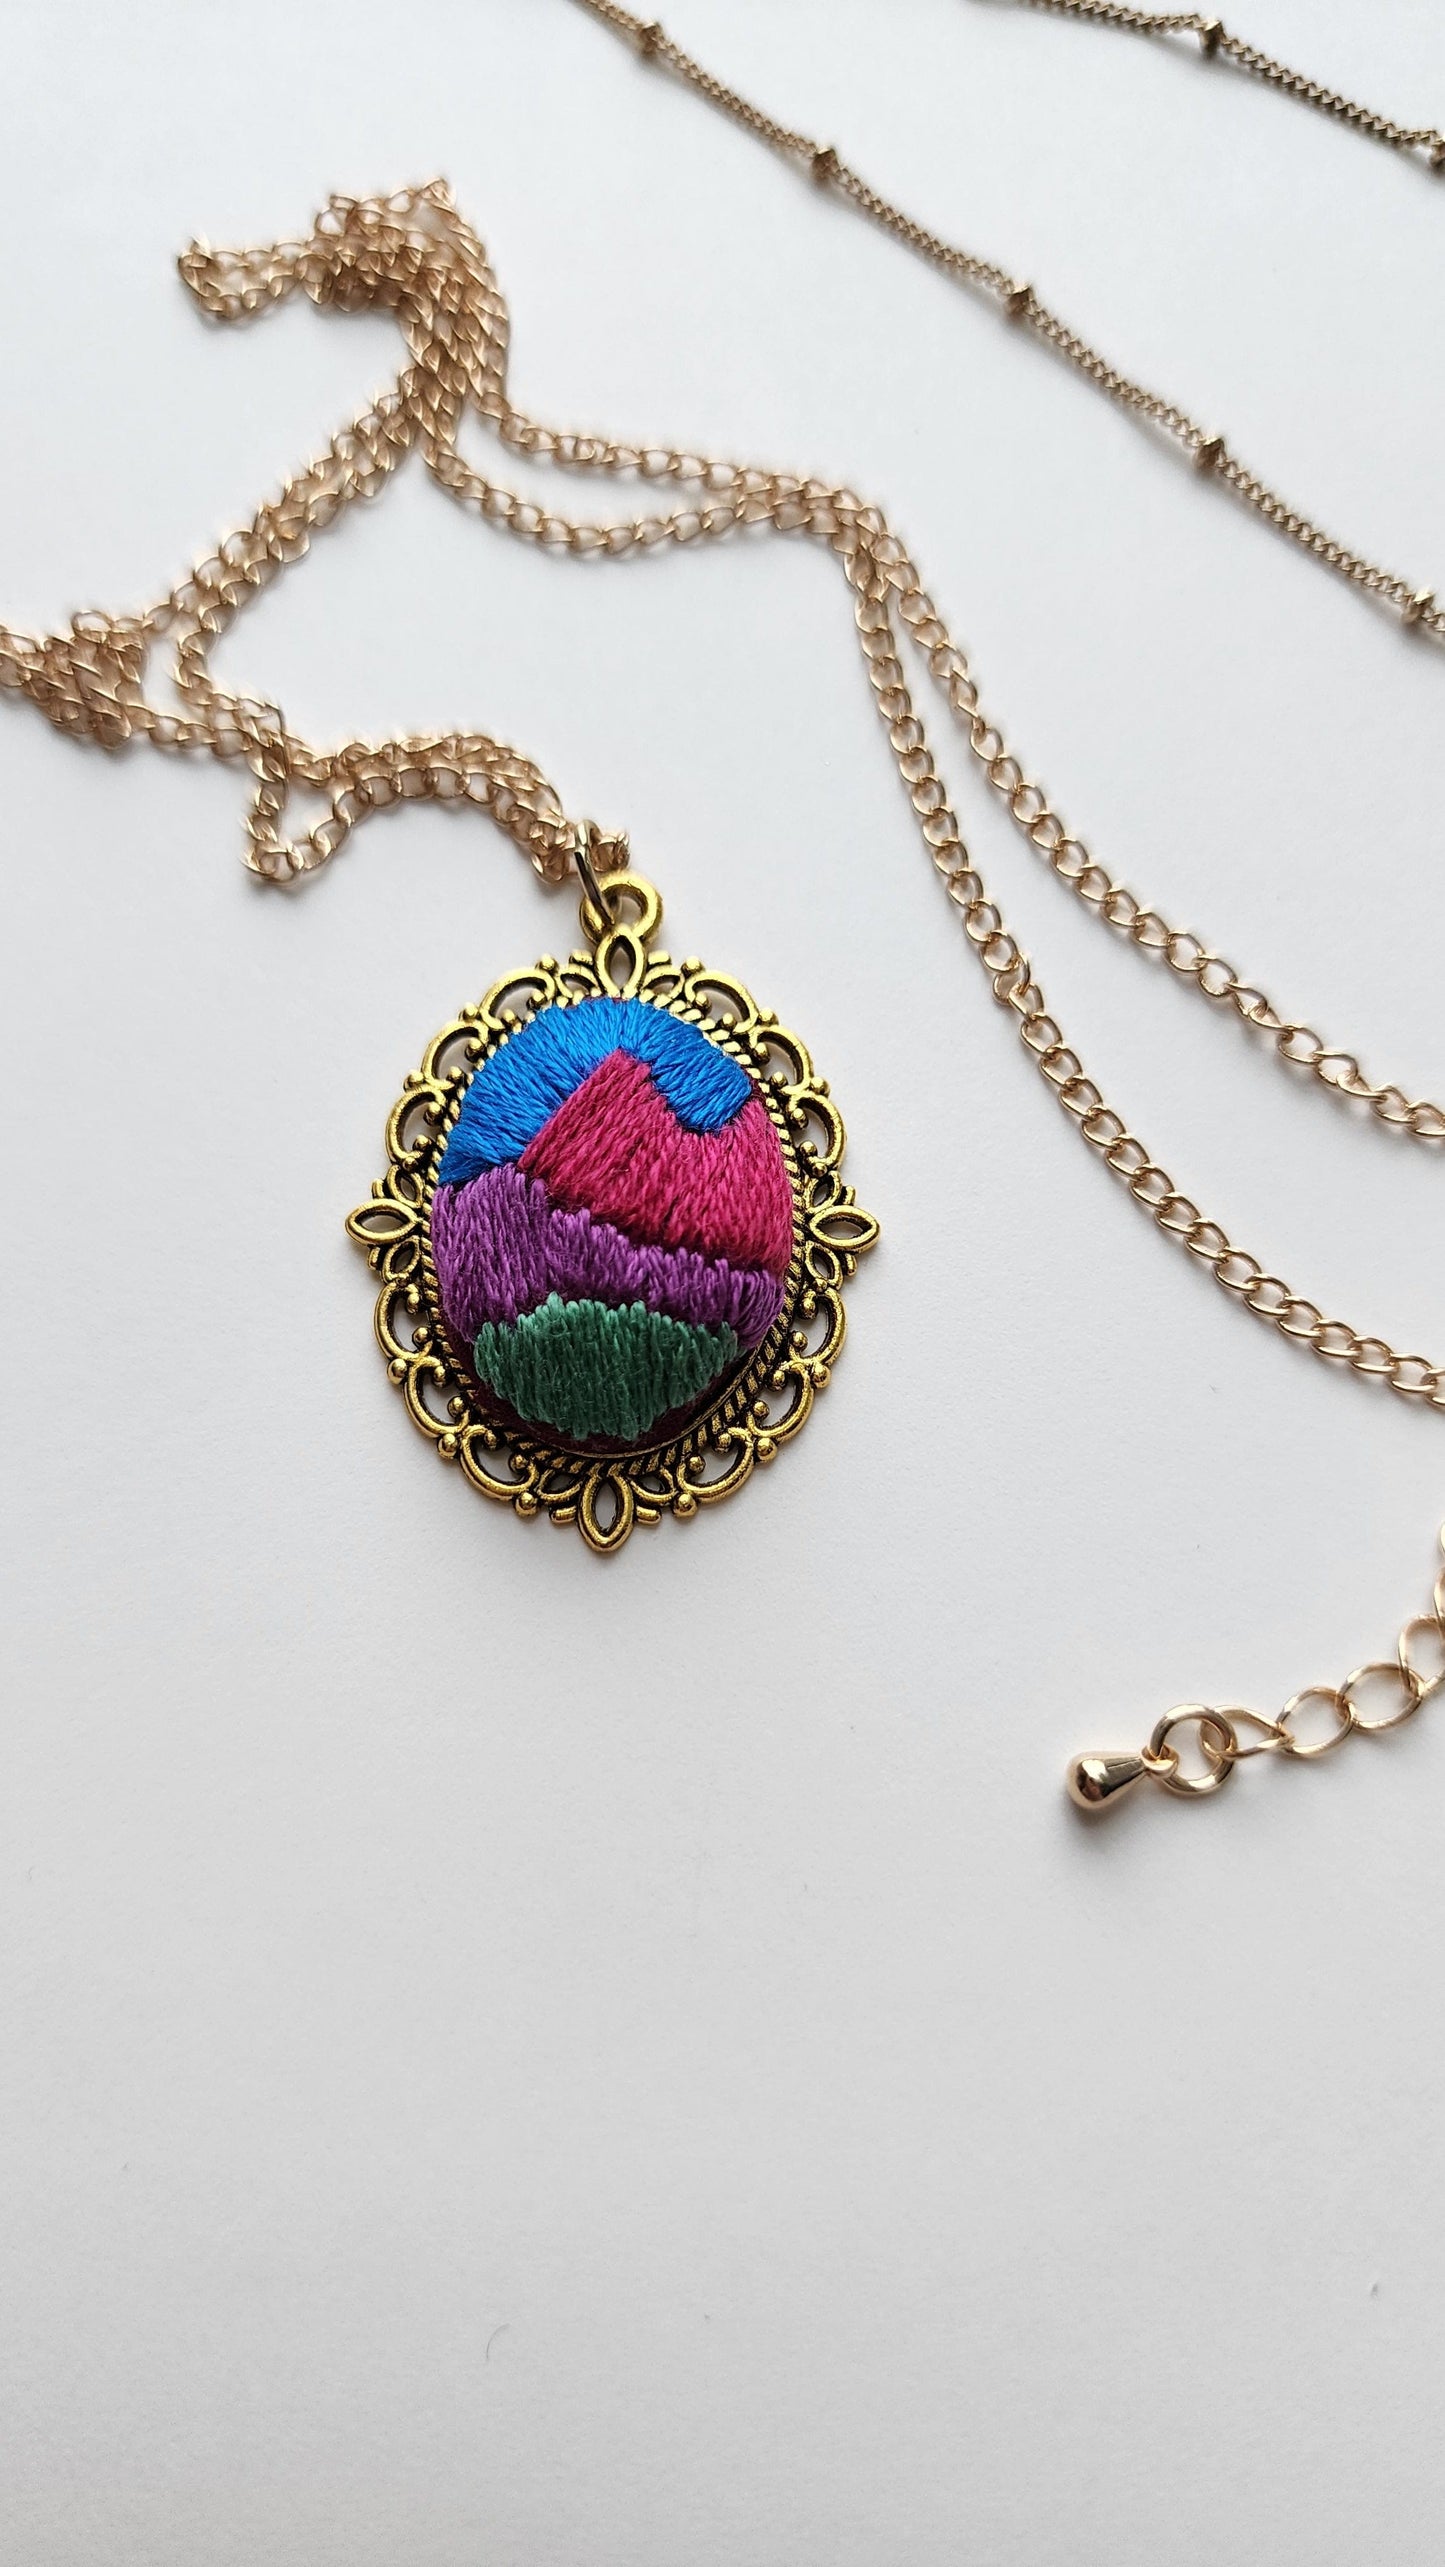 Embrace Embroidery Embroidered Necklace Retro Landscape Pendant